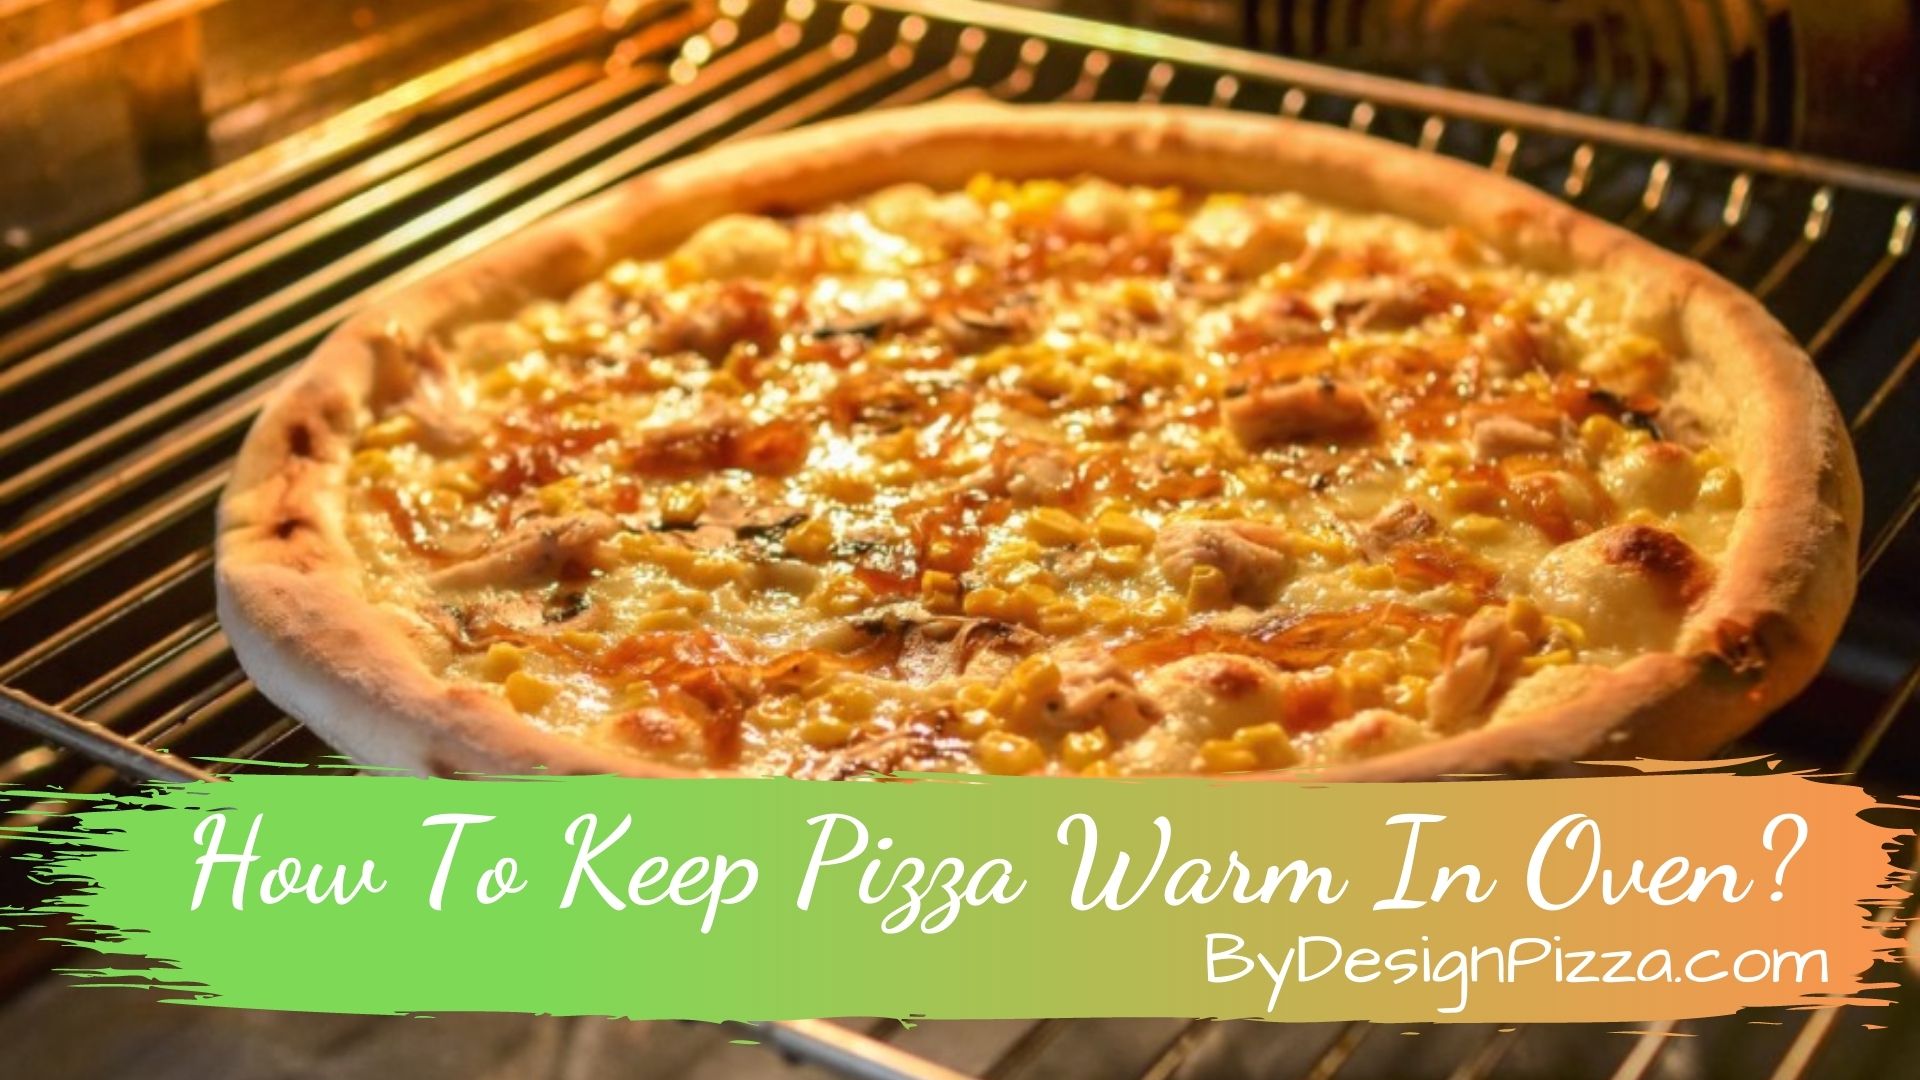 How To Keep Pizza Warm In Oven